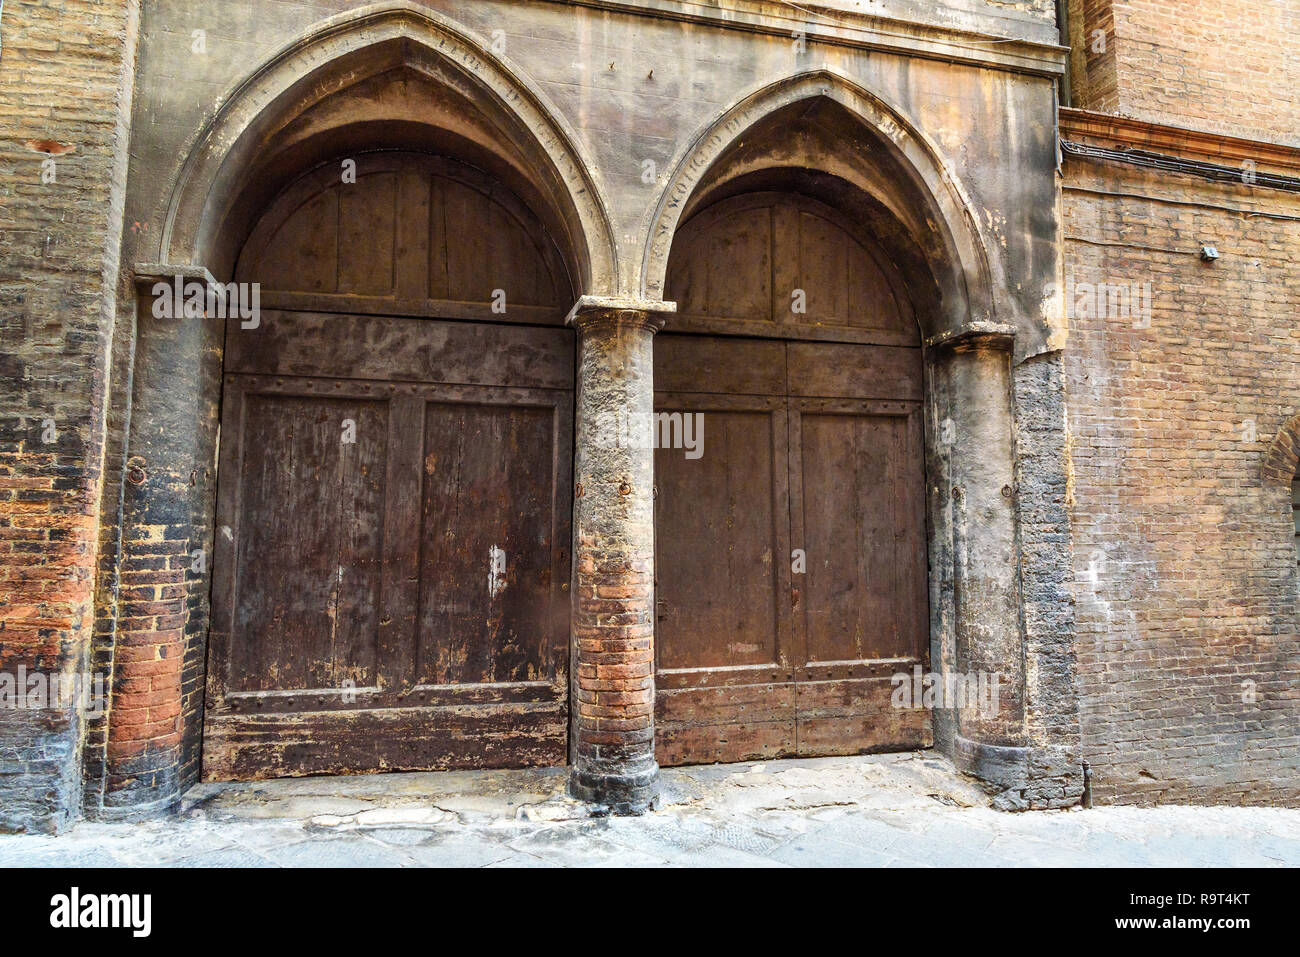 Traditional wooden arch door on medieval brick building in Siena. Italy  Stock Photo - Alamy